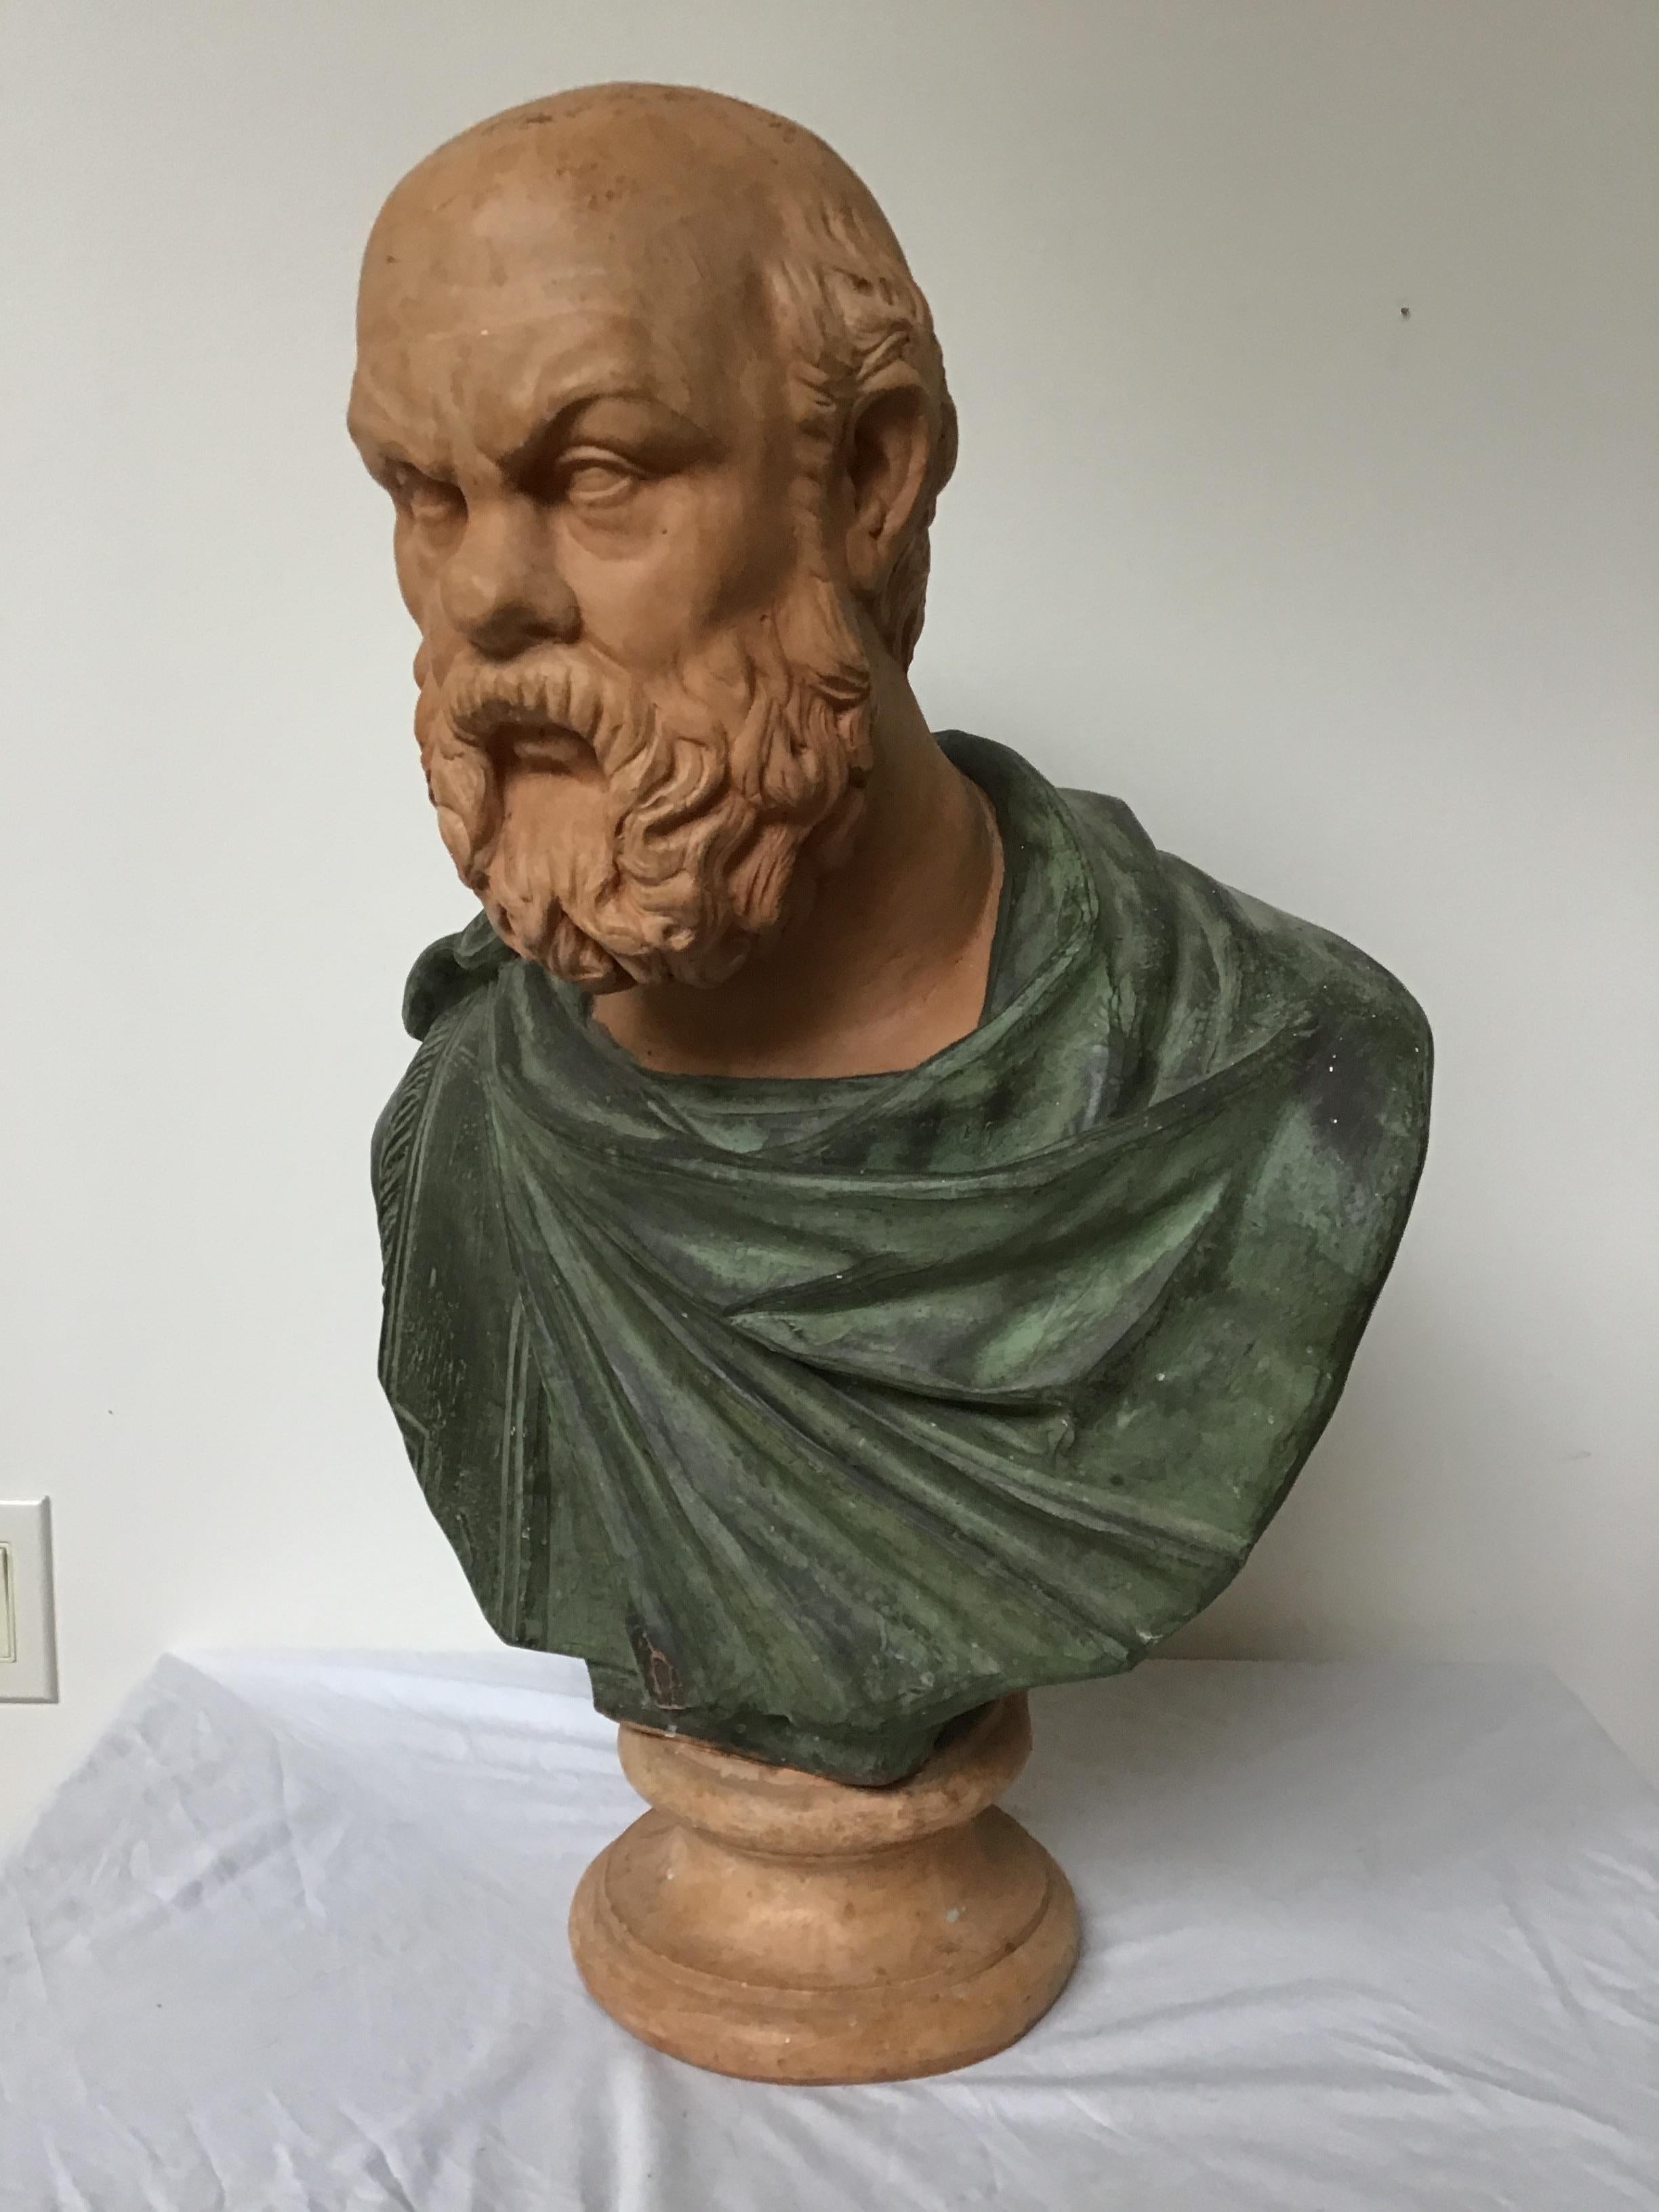 Terracotta bust of Socrates.